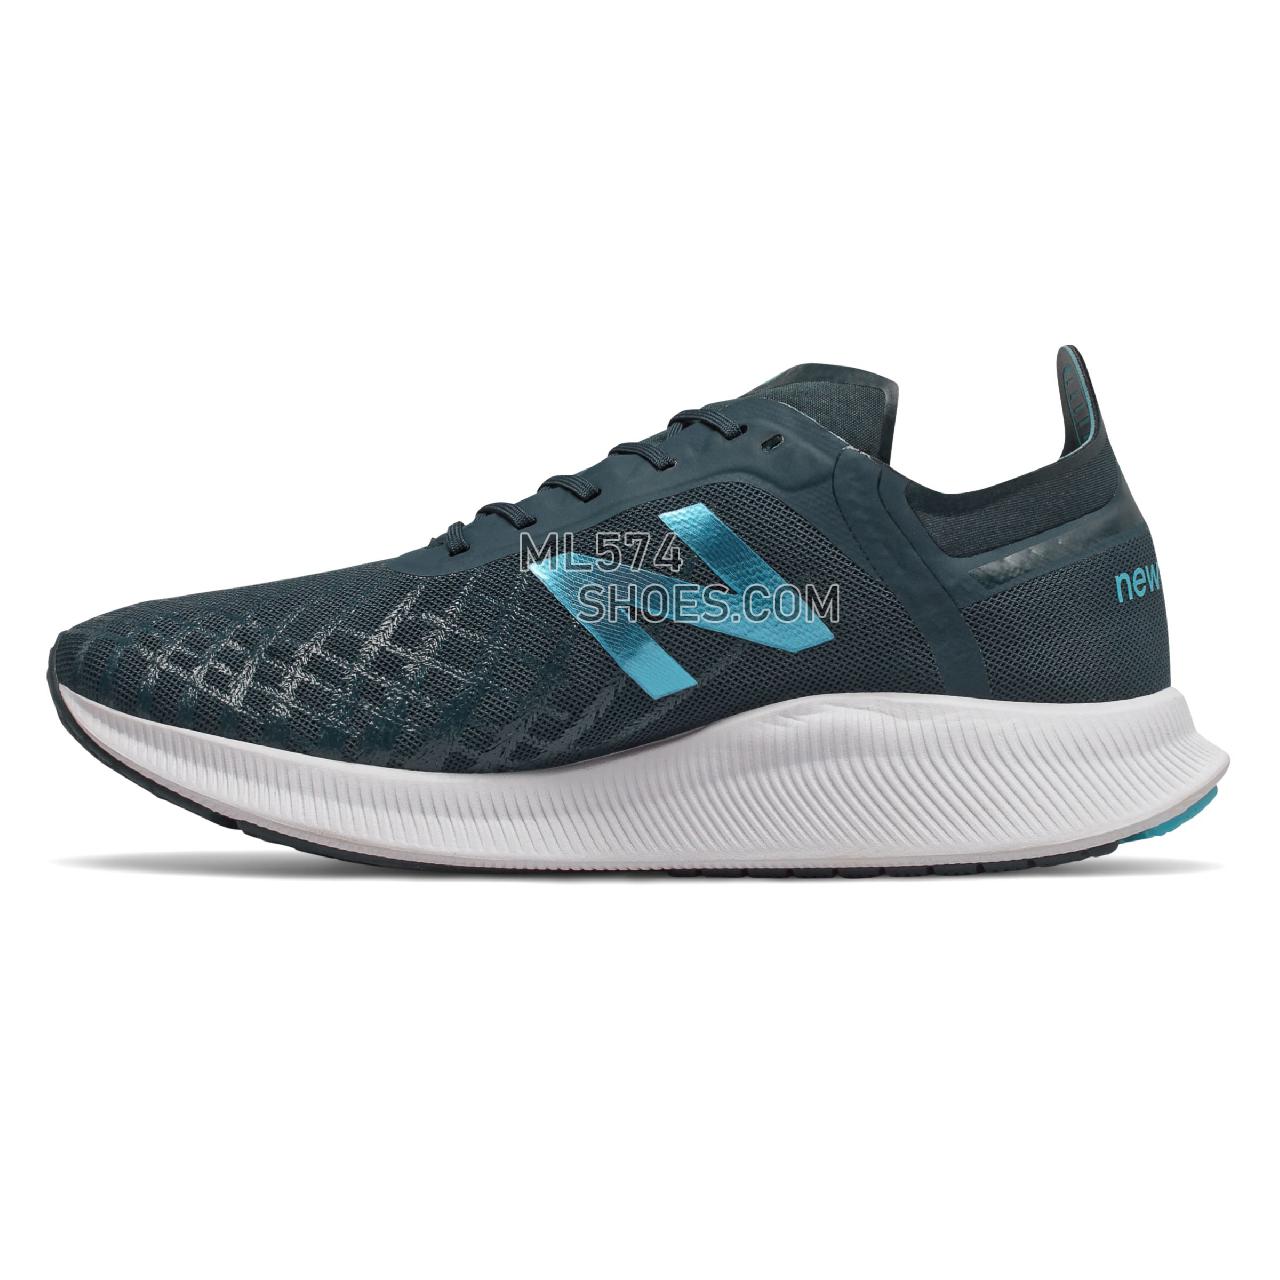 New Balance FuelCell Tekela - Men's Neutral Running - Supercell with Bayside - MFCTKLB